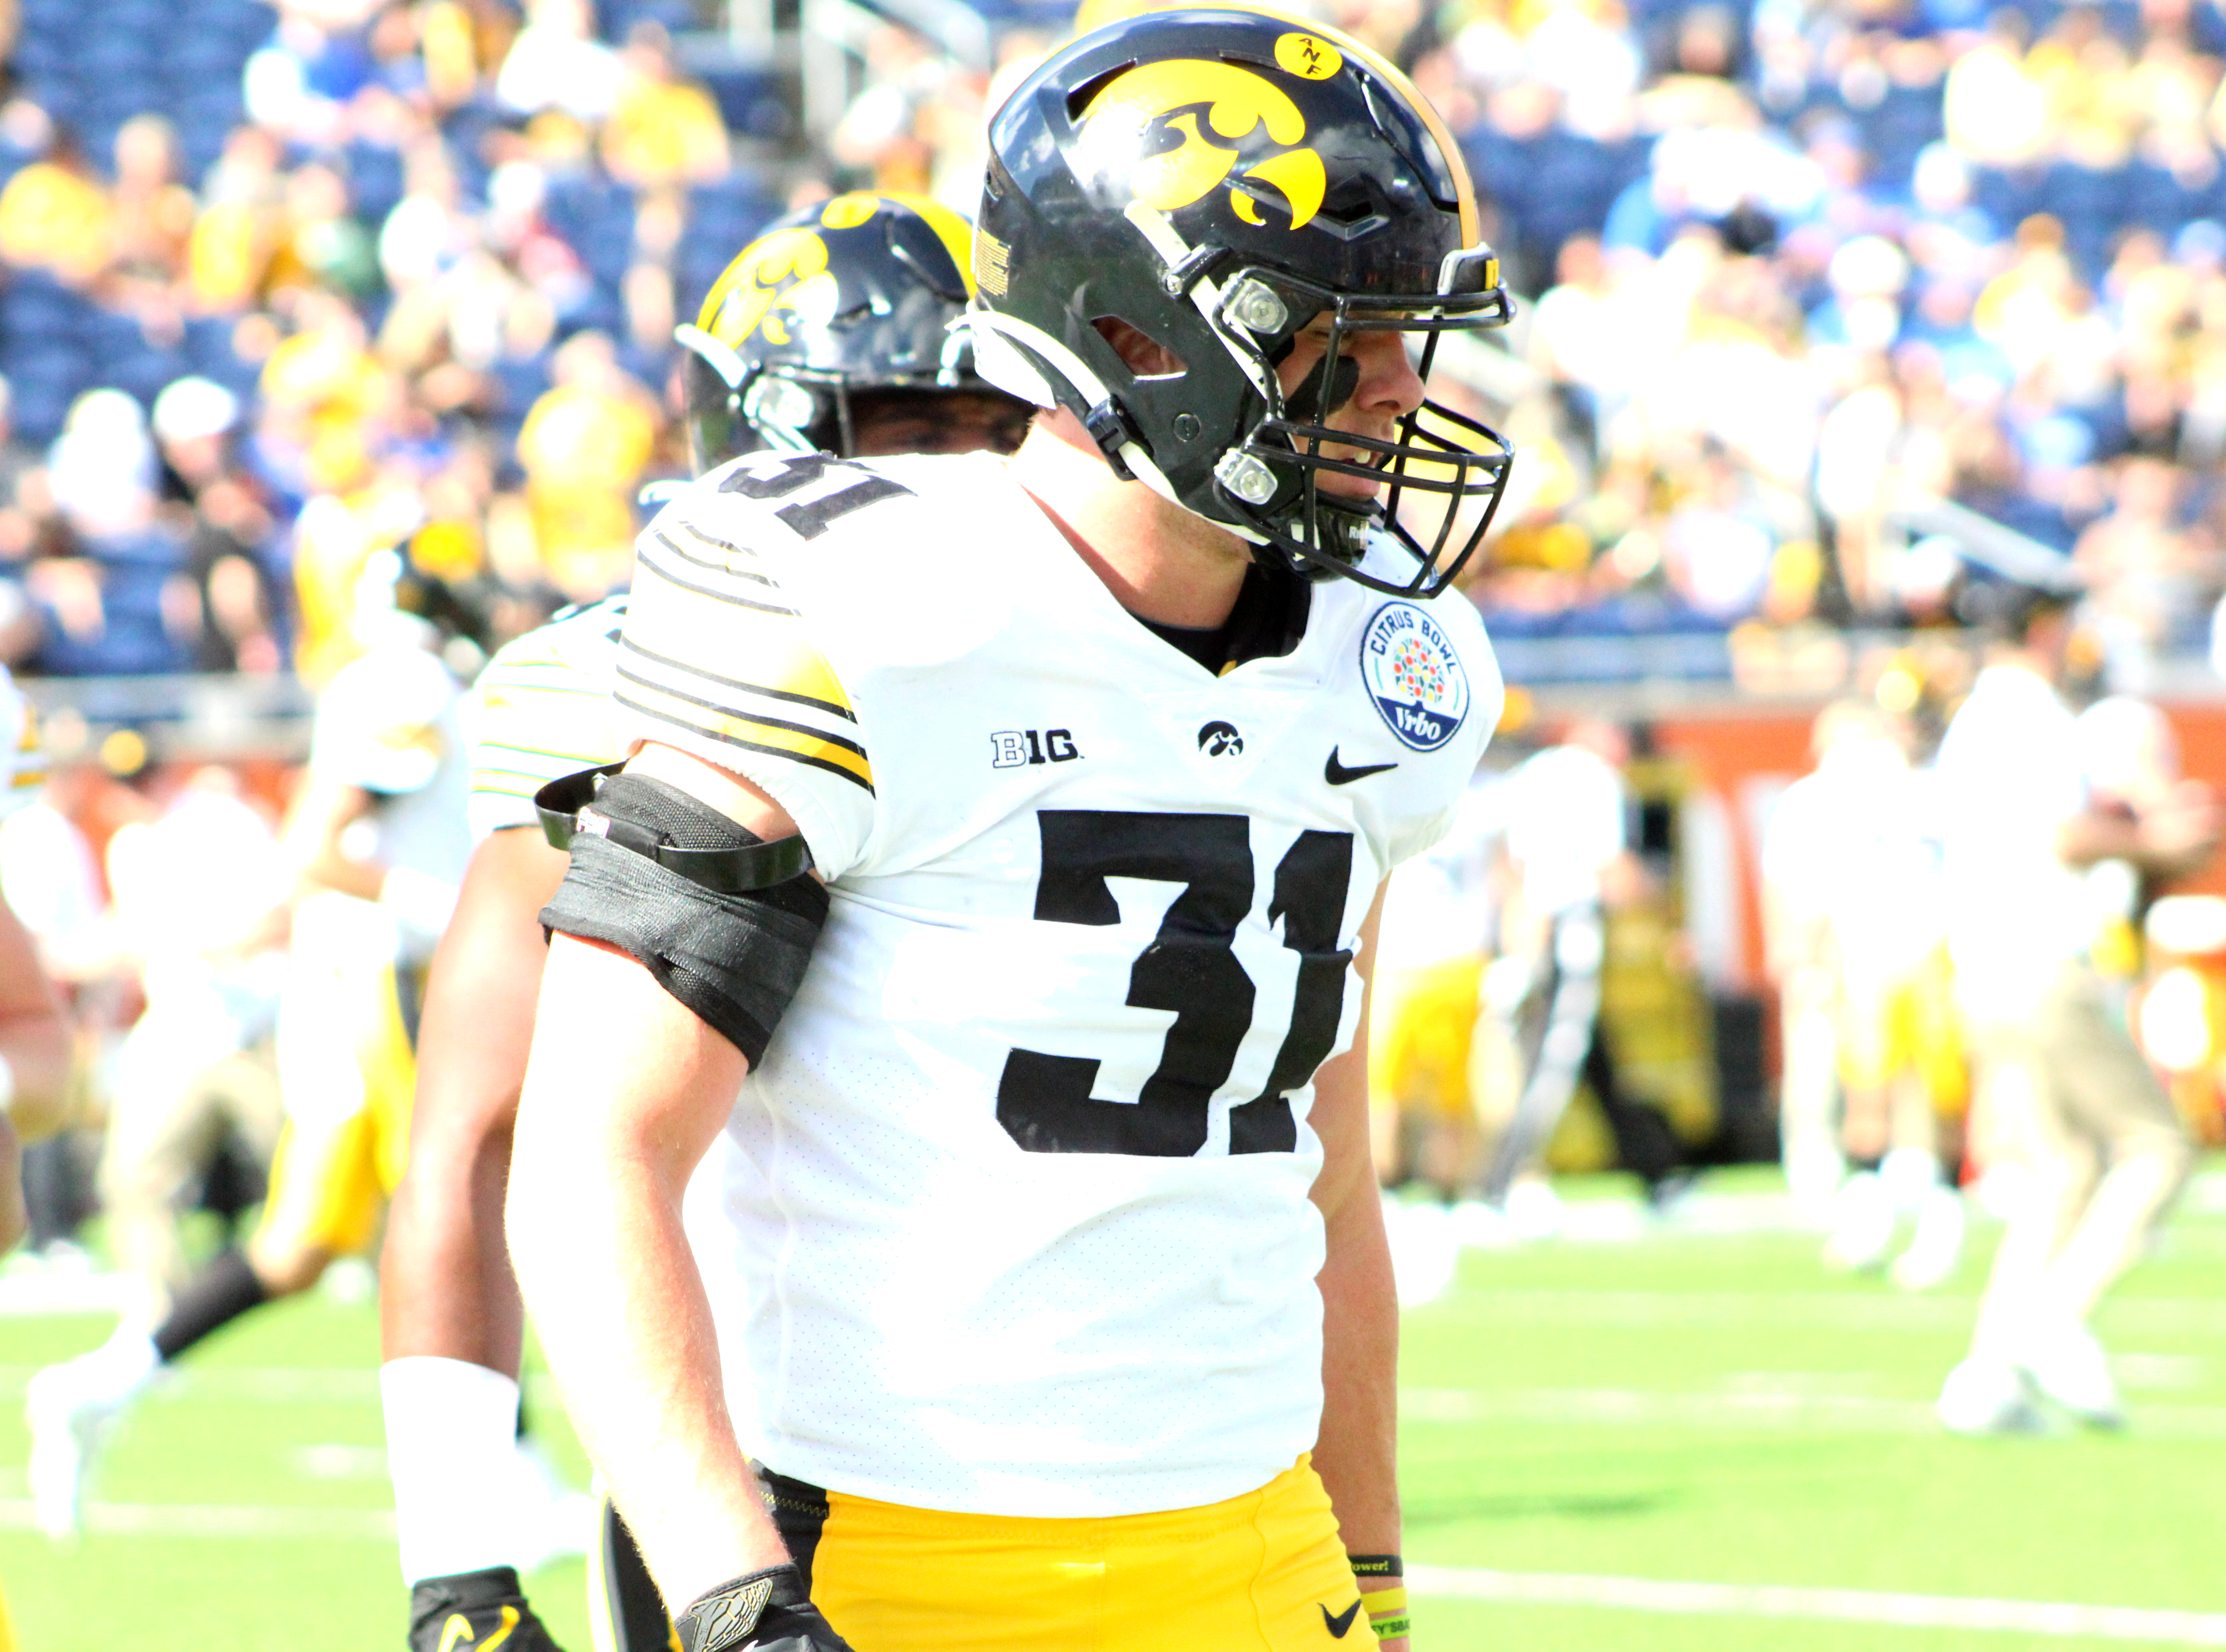 Iowa football's Jack Campbell emerging as a national star